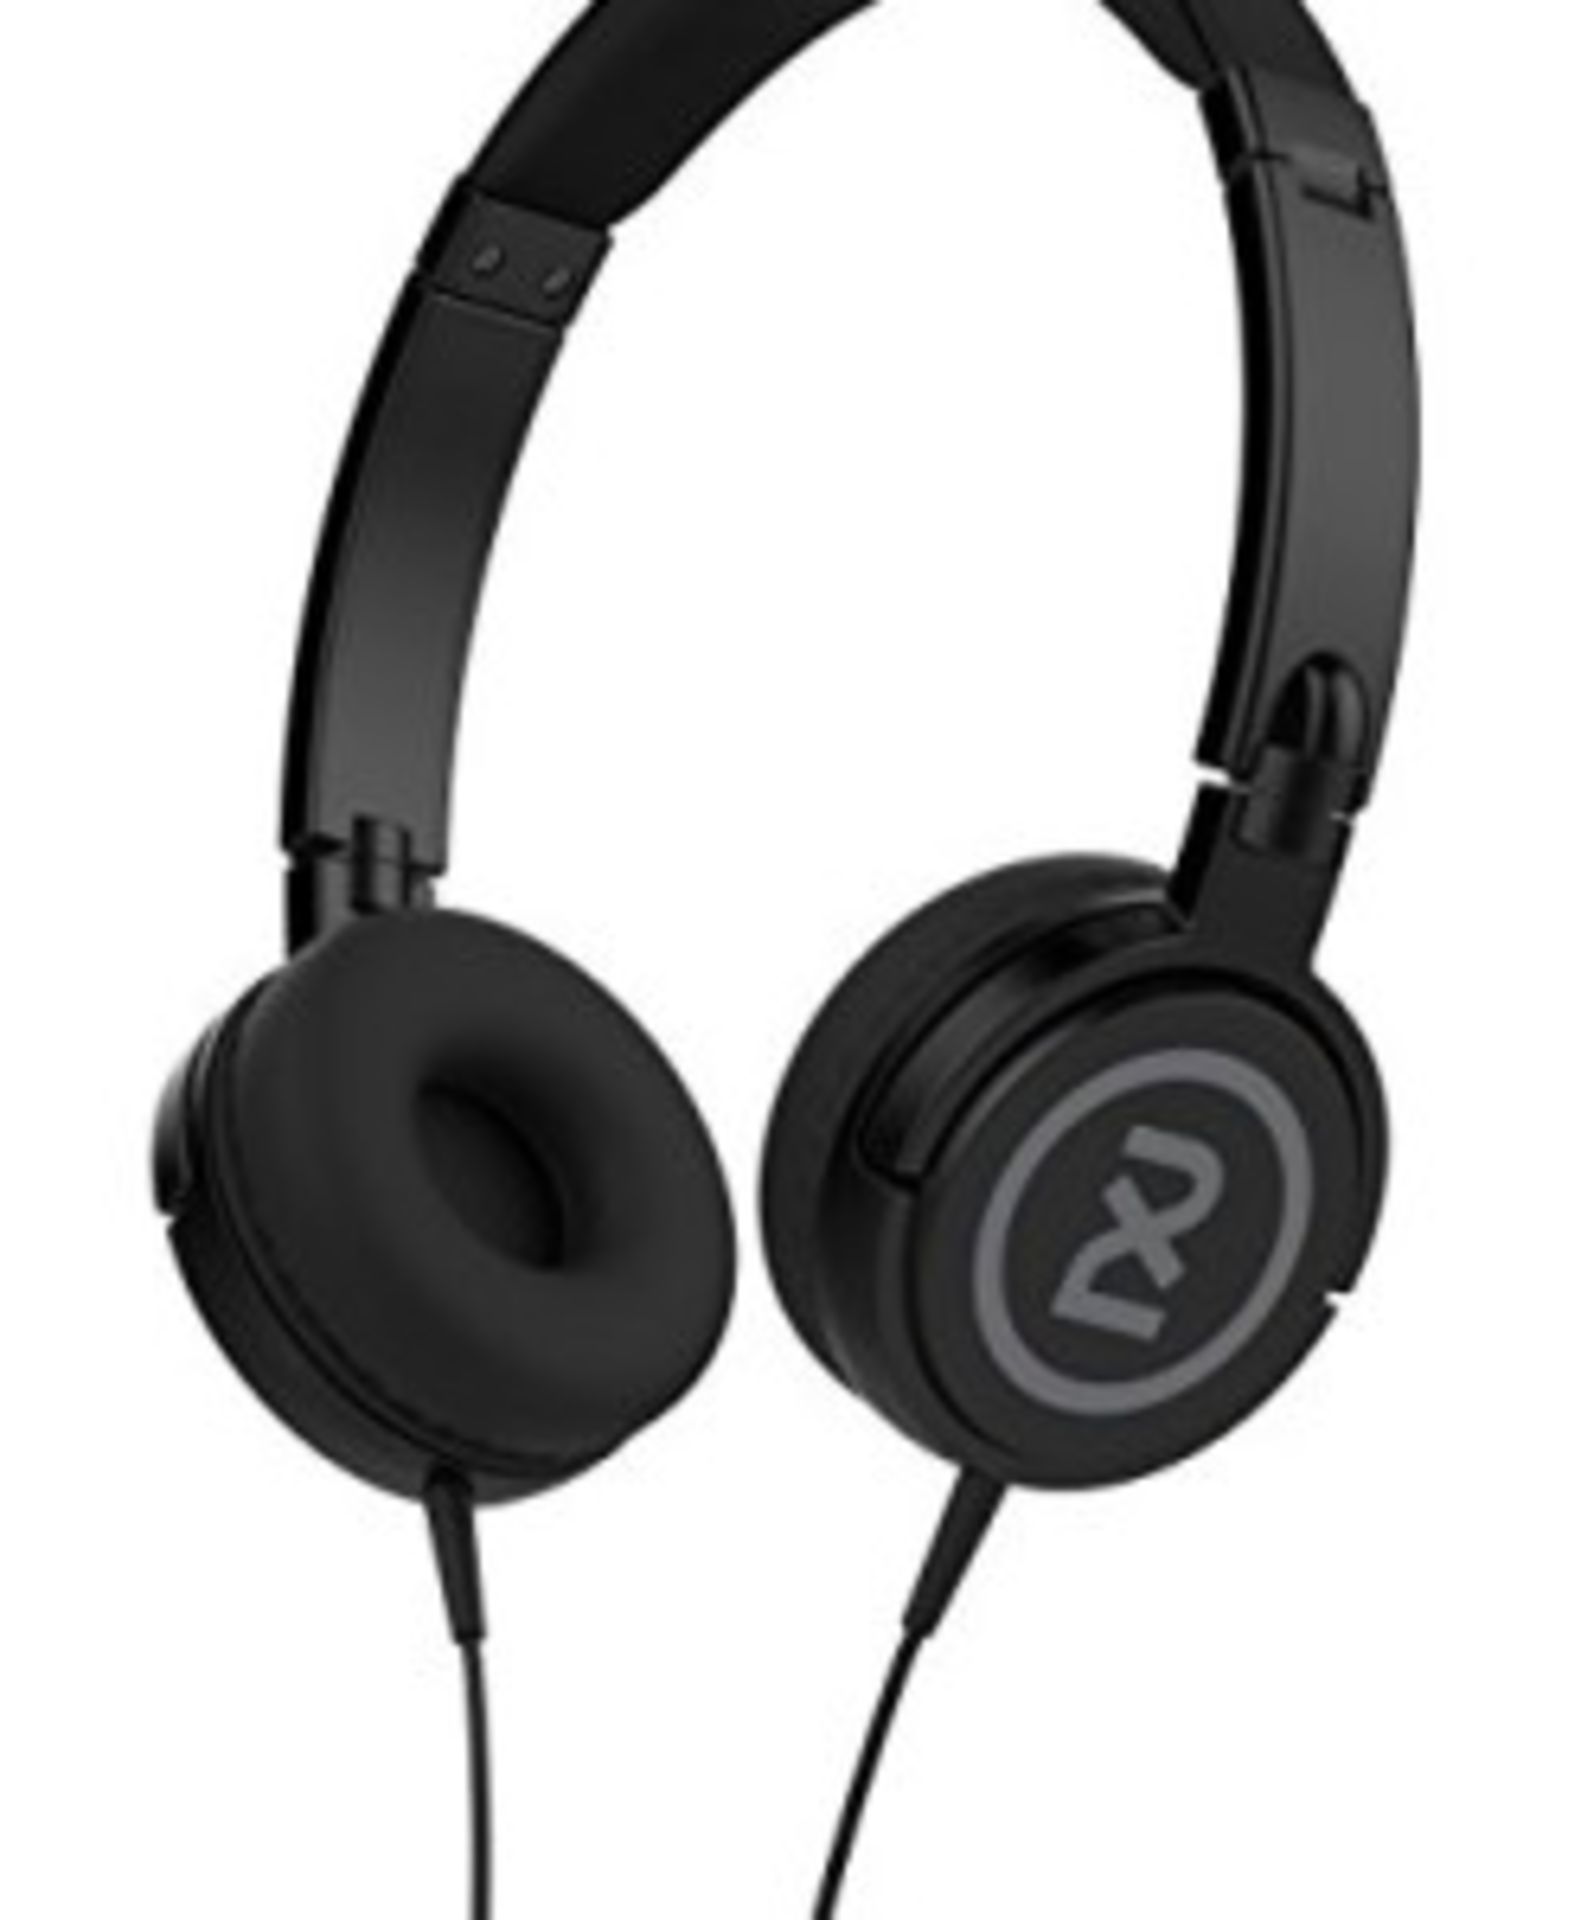 V *TRADE QTY* Brand New Skullcandy 2XL Shakedown Headphones X 3 YOUR BID PRICE TO BE MULTIPLIED BY